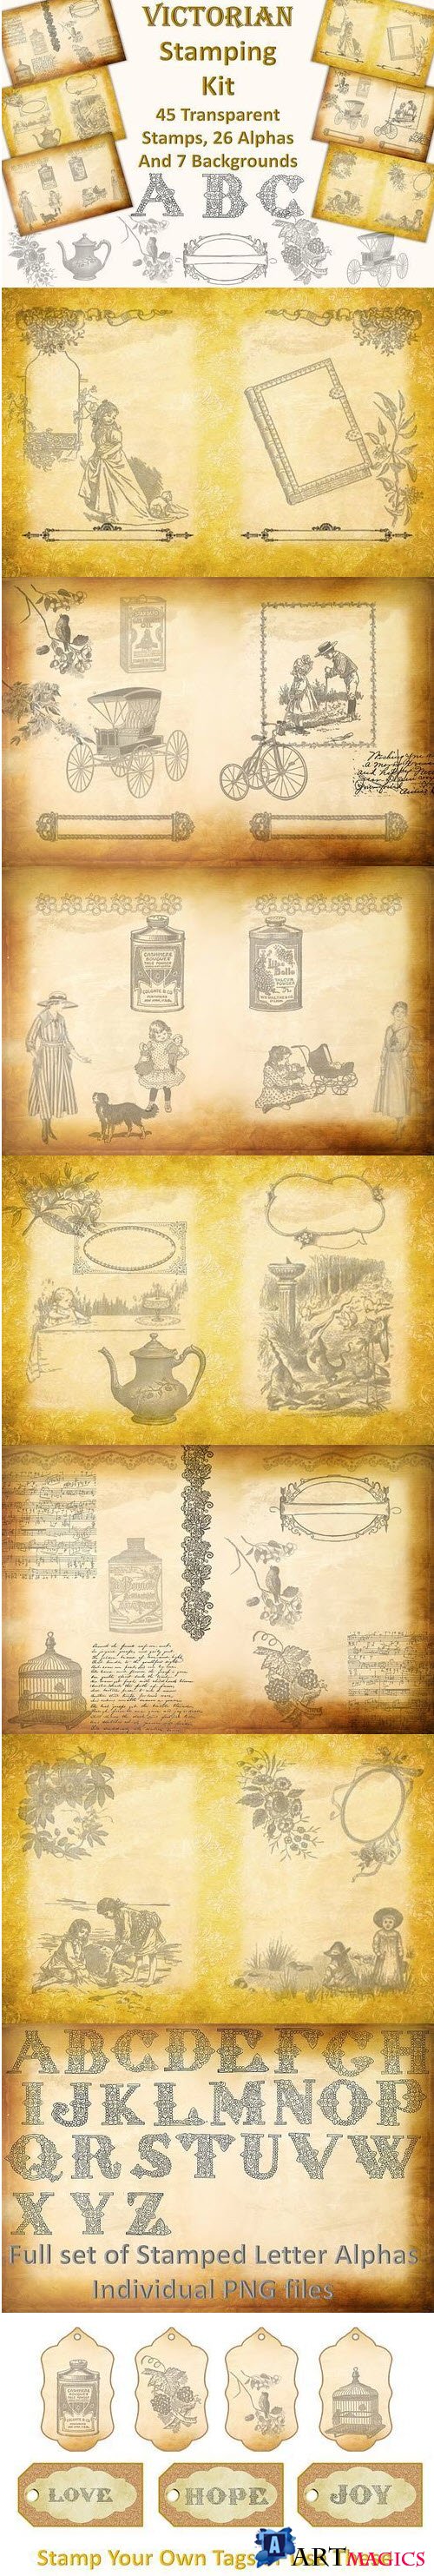 Victorian Digital stamping Kit with Alphas and backgrounds - 382897